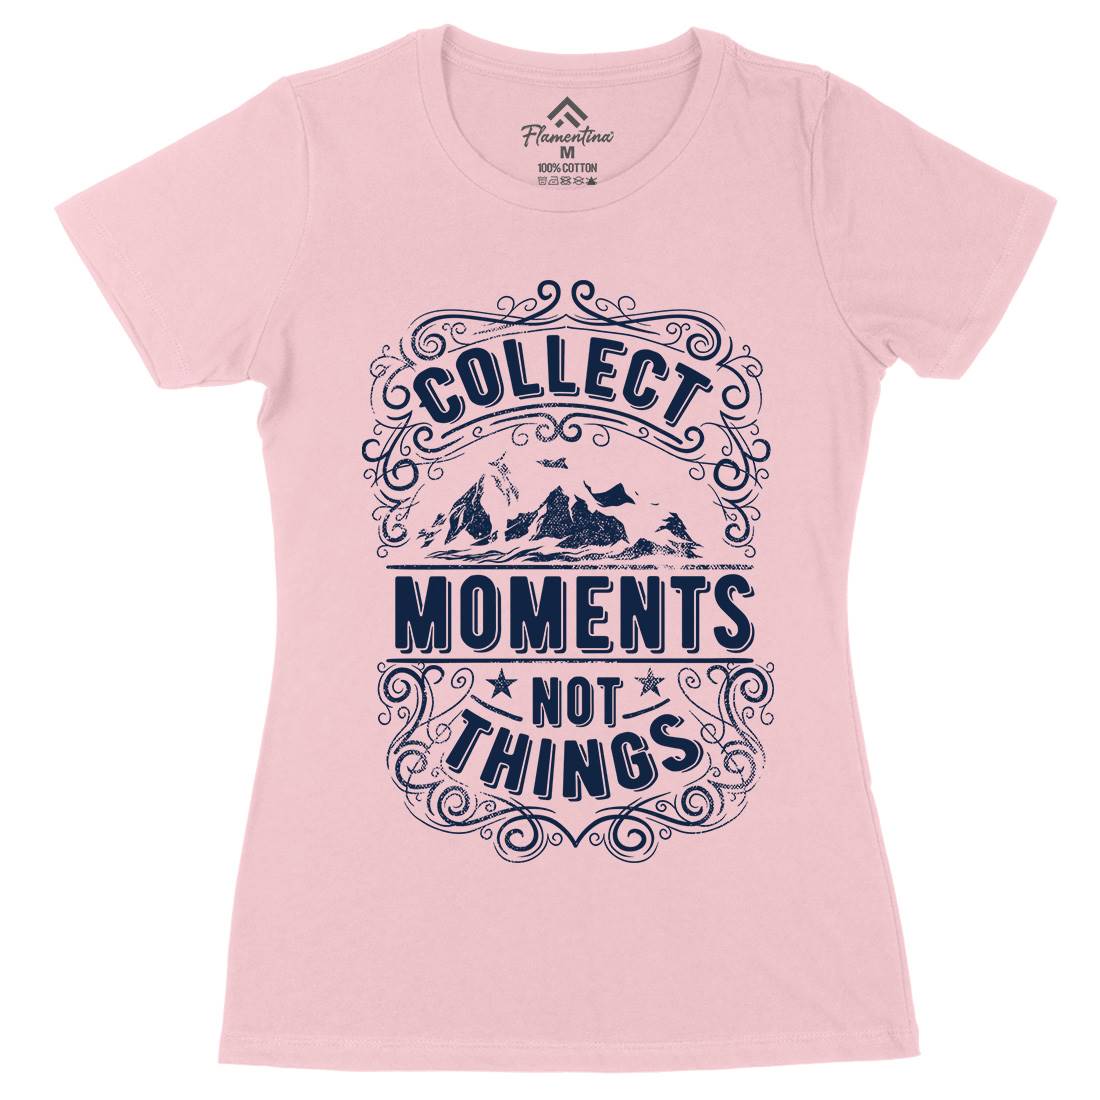 Collect Moments Not Things Womens Organic Crew Neck T-Shirt Quotes C918